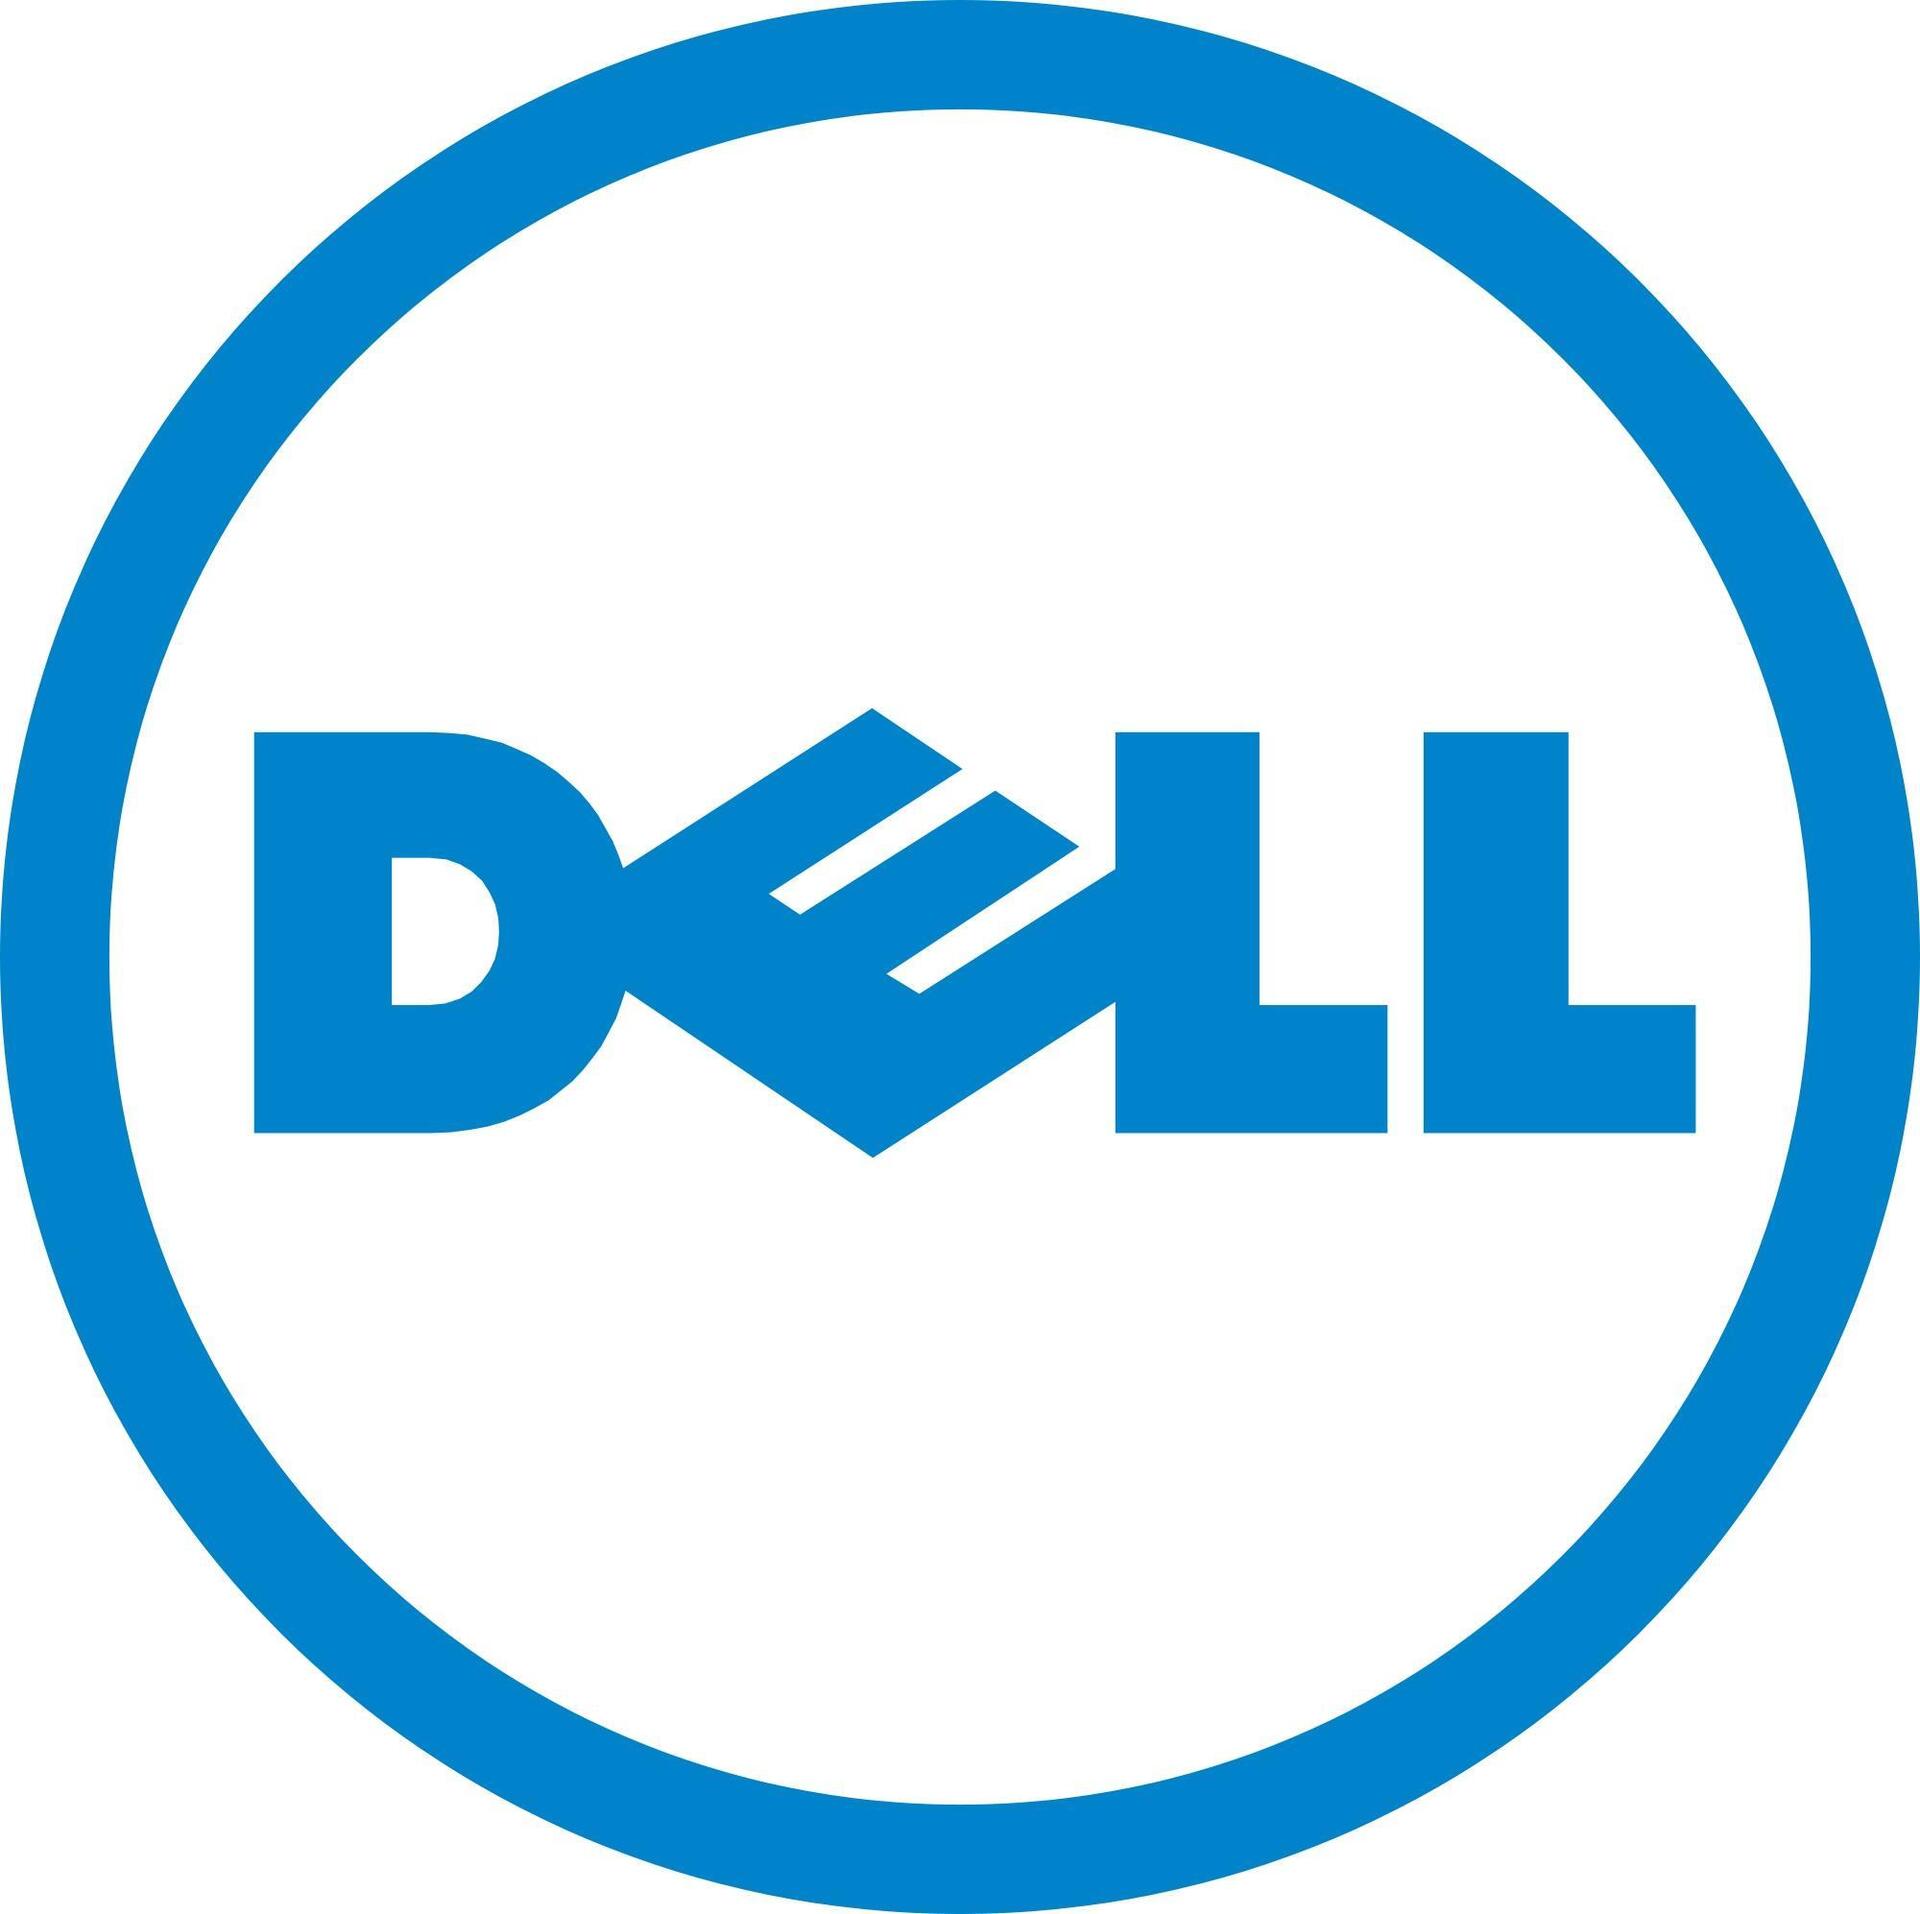 DELL 3 Year Gold Hardware Maintenance by Avocent for the Dell DMPU4032